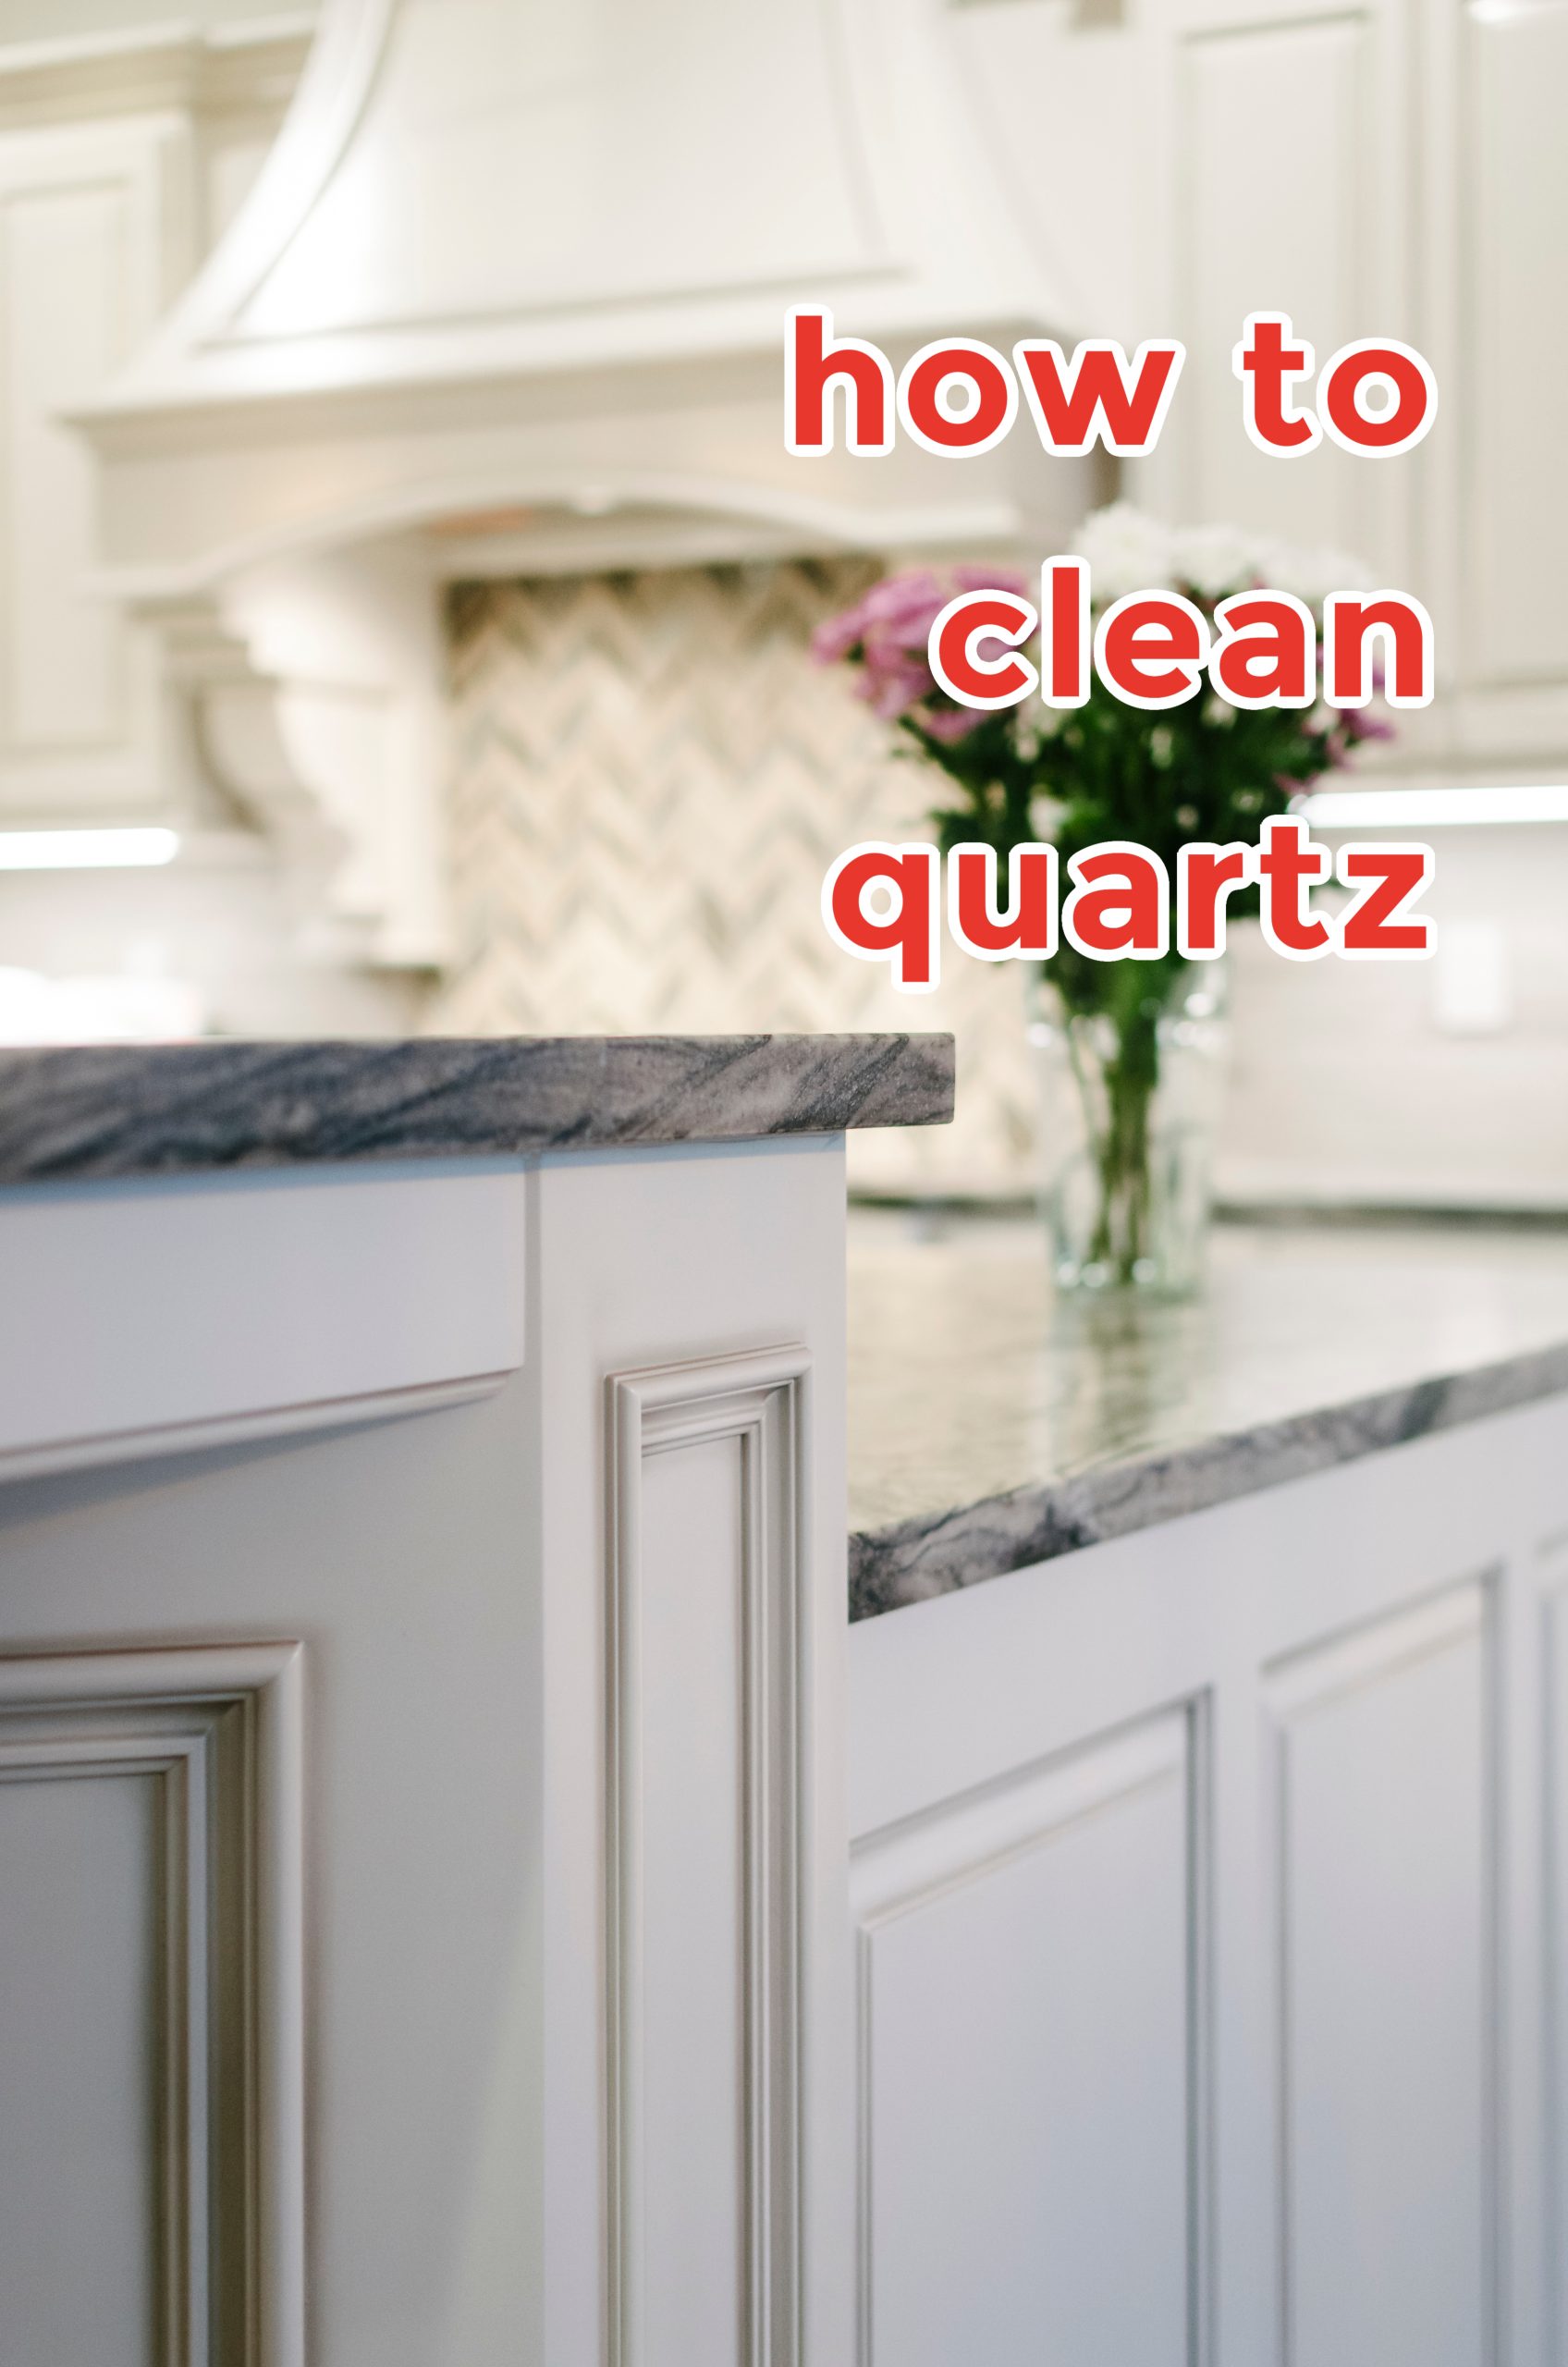         Learn the best techniques for cleaning quartz countertops.